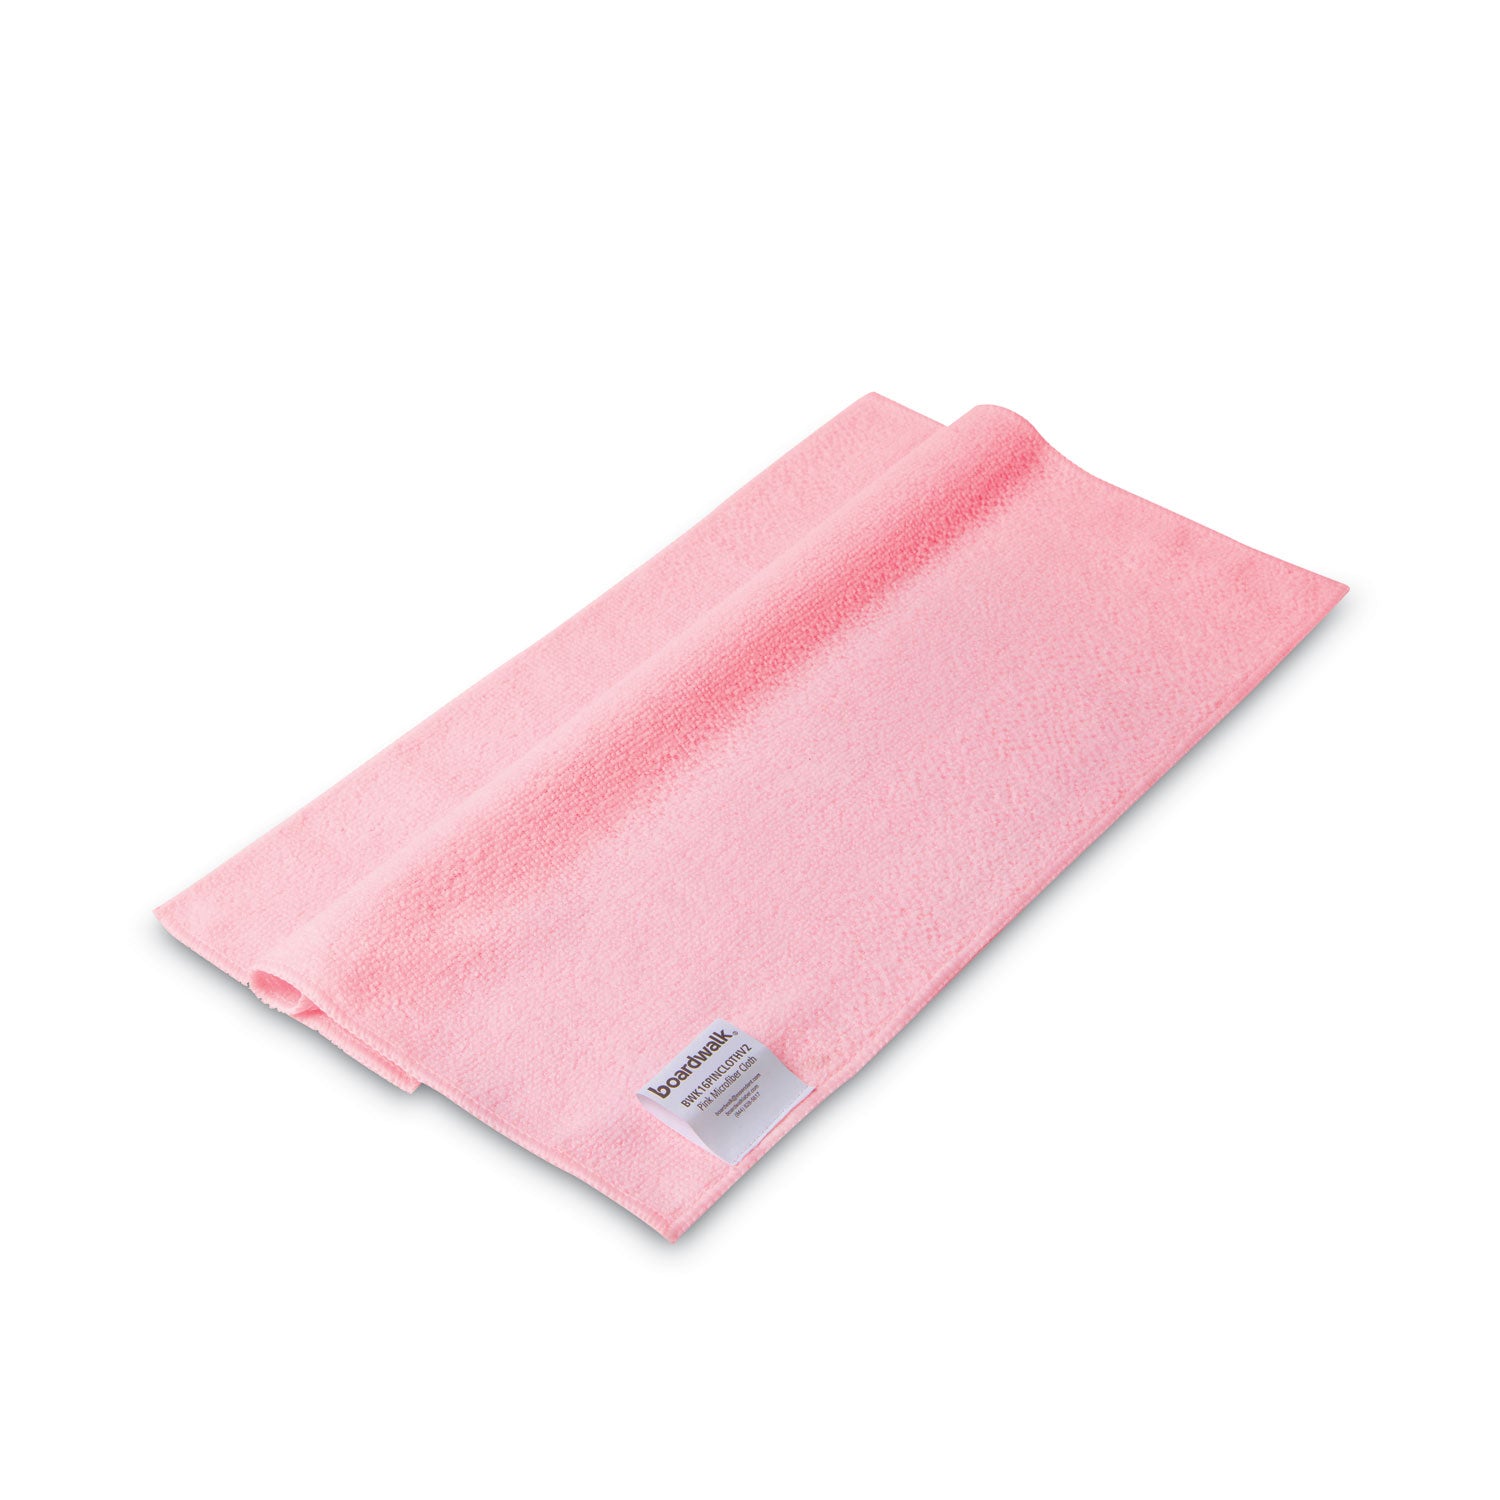 microfiber-cleaning-cloths-16-x-16-pink-24-pack_bwk16pinclothv2 - 2